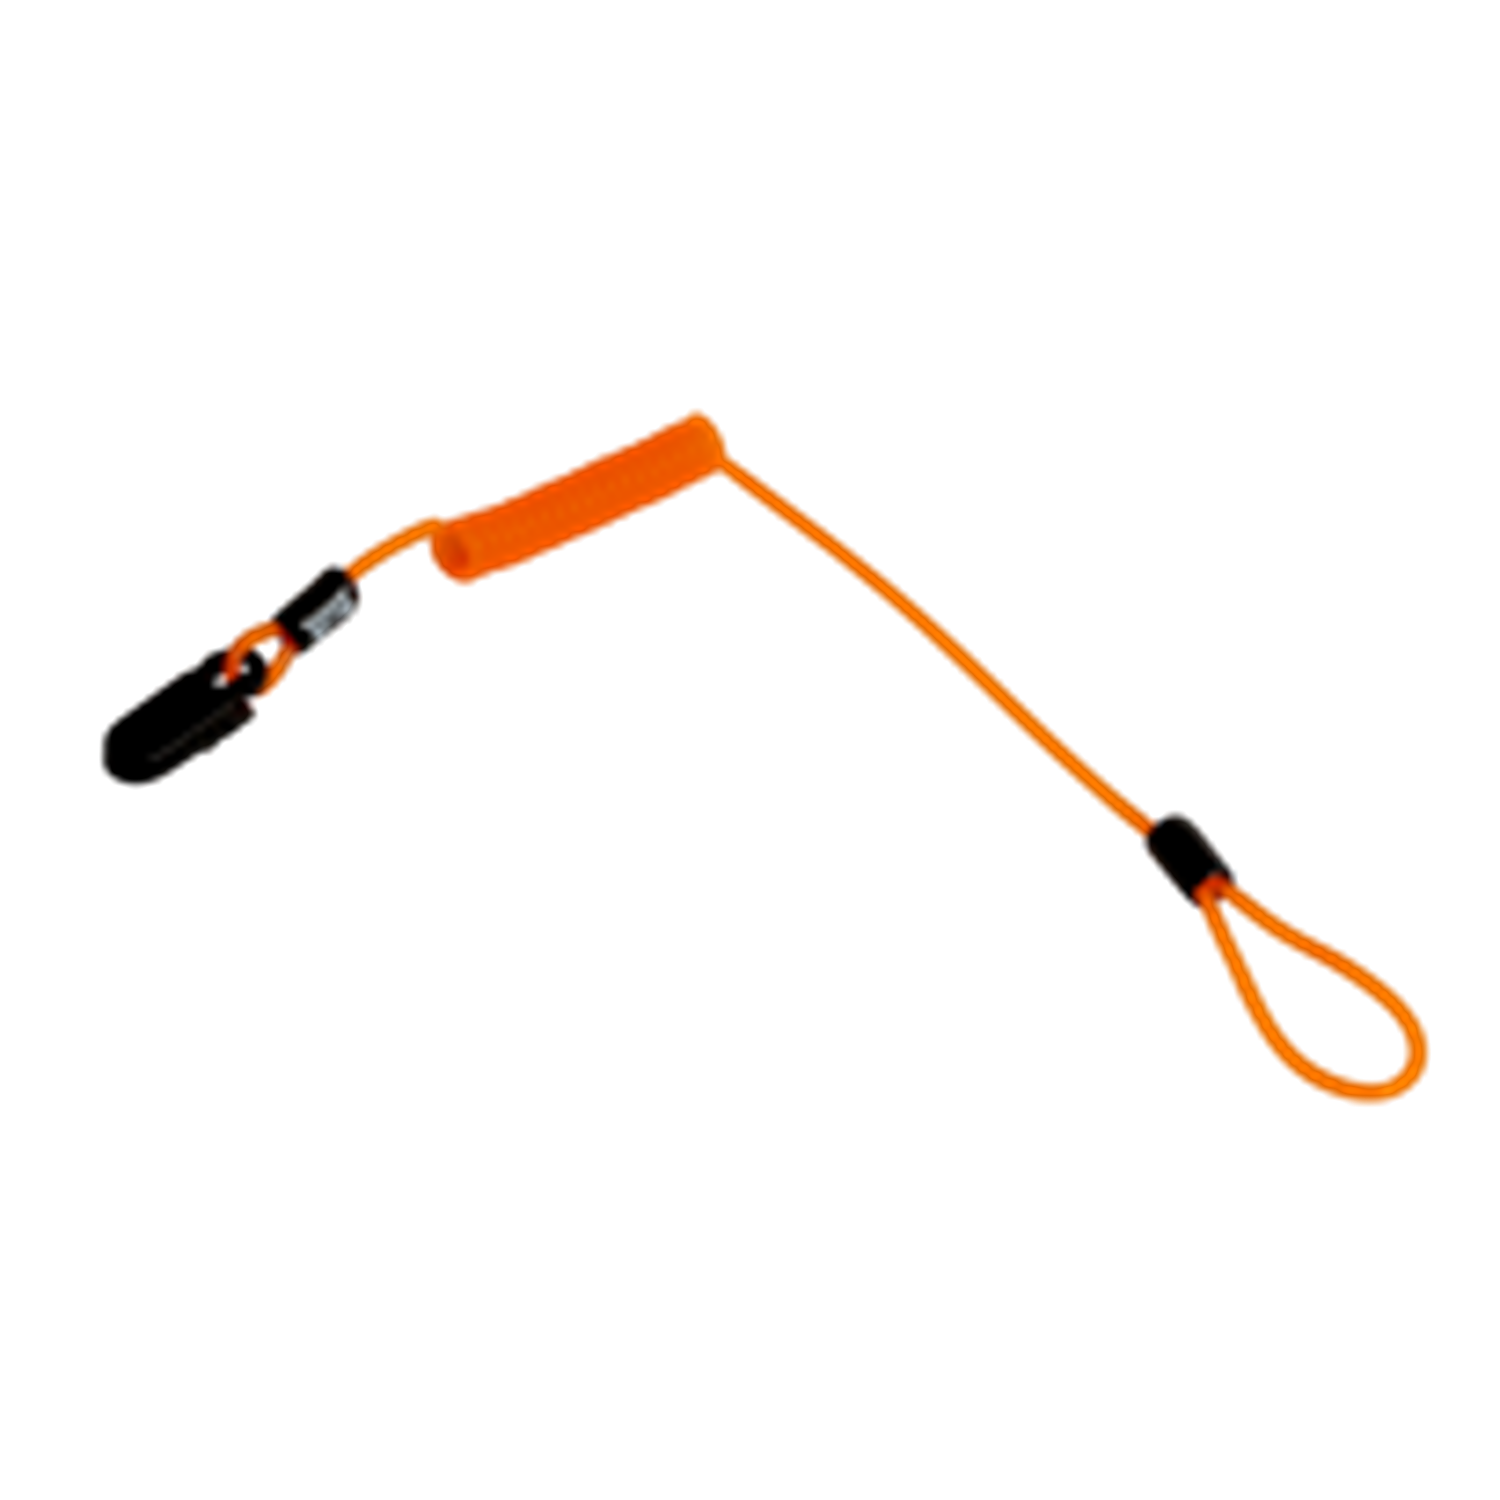 BAHCO 439000004 Strap Lanyard with Plastic Clip (BAHCO Tools) - Premium Lanyard from BAHCO - Shop now at Yew Aik.